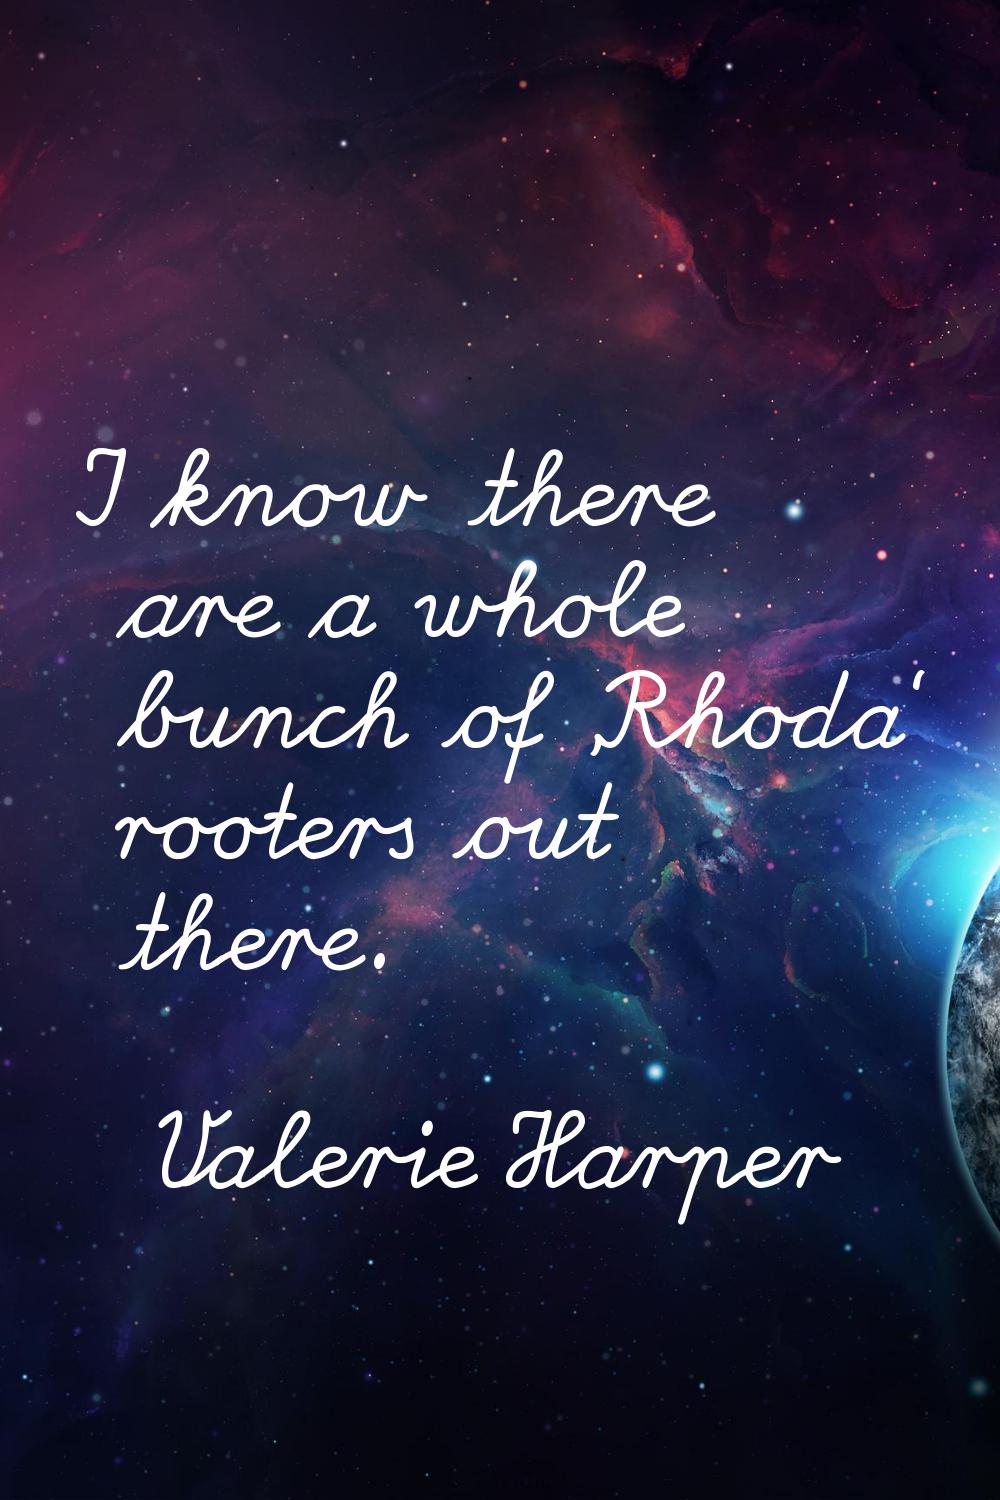 I know there are a whole bunch of 'Rhoda' rooters out there.